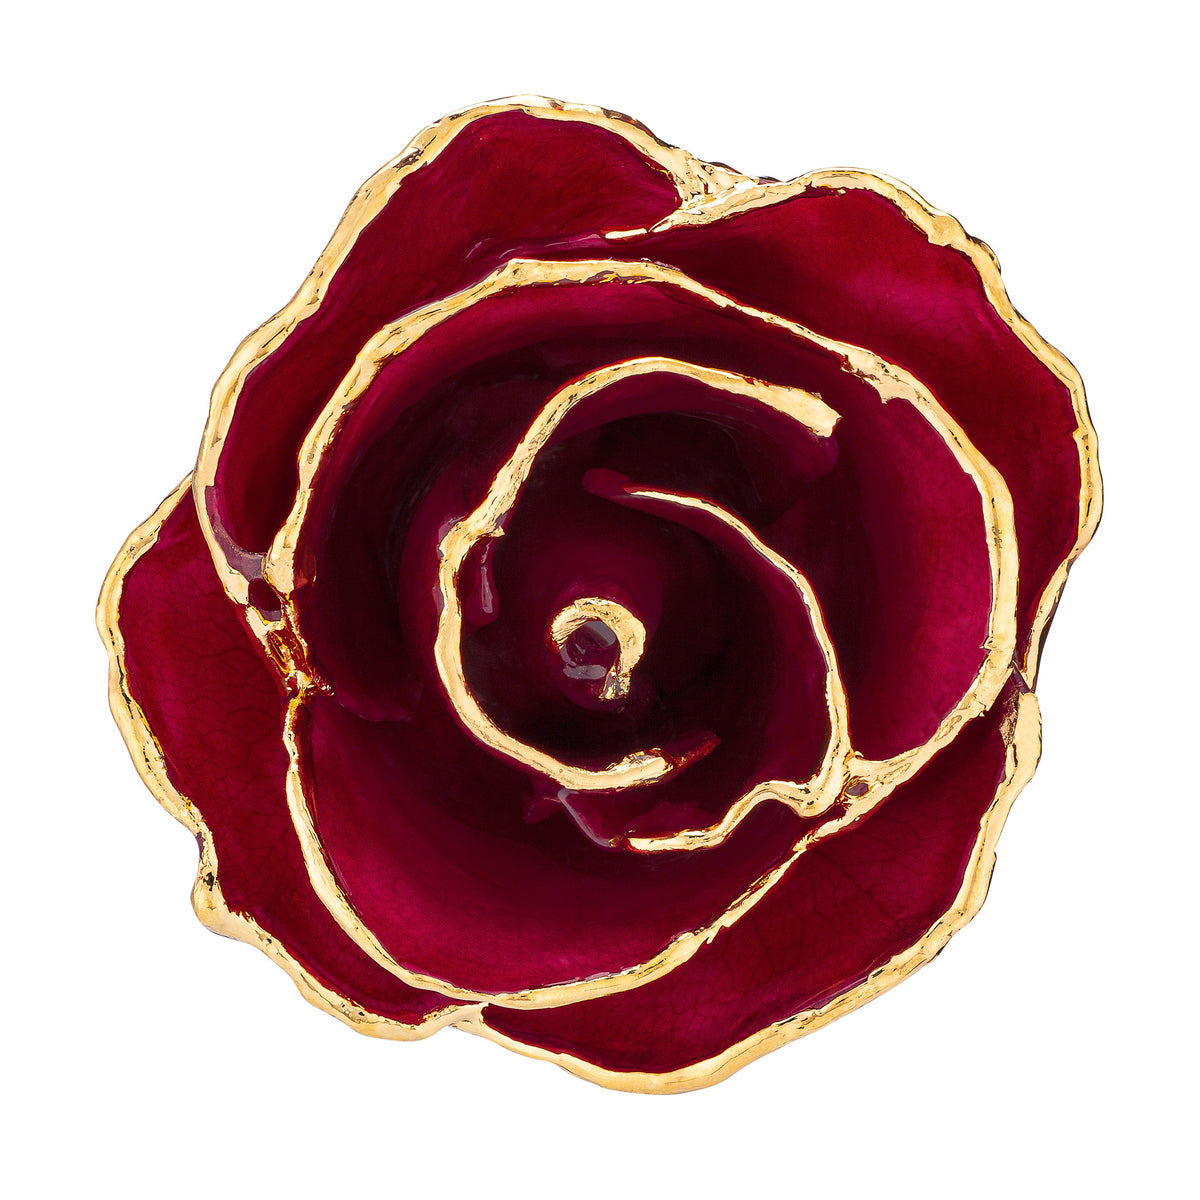 24K Gold Trimmed Forever Rose with Deep Red Burgundy Petals with View of Stem, Leaves, and Rose Petals and Showing Detail of Gold Trim Top View